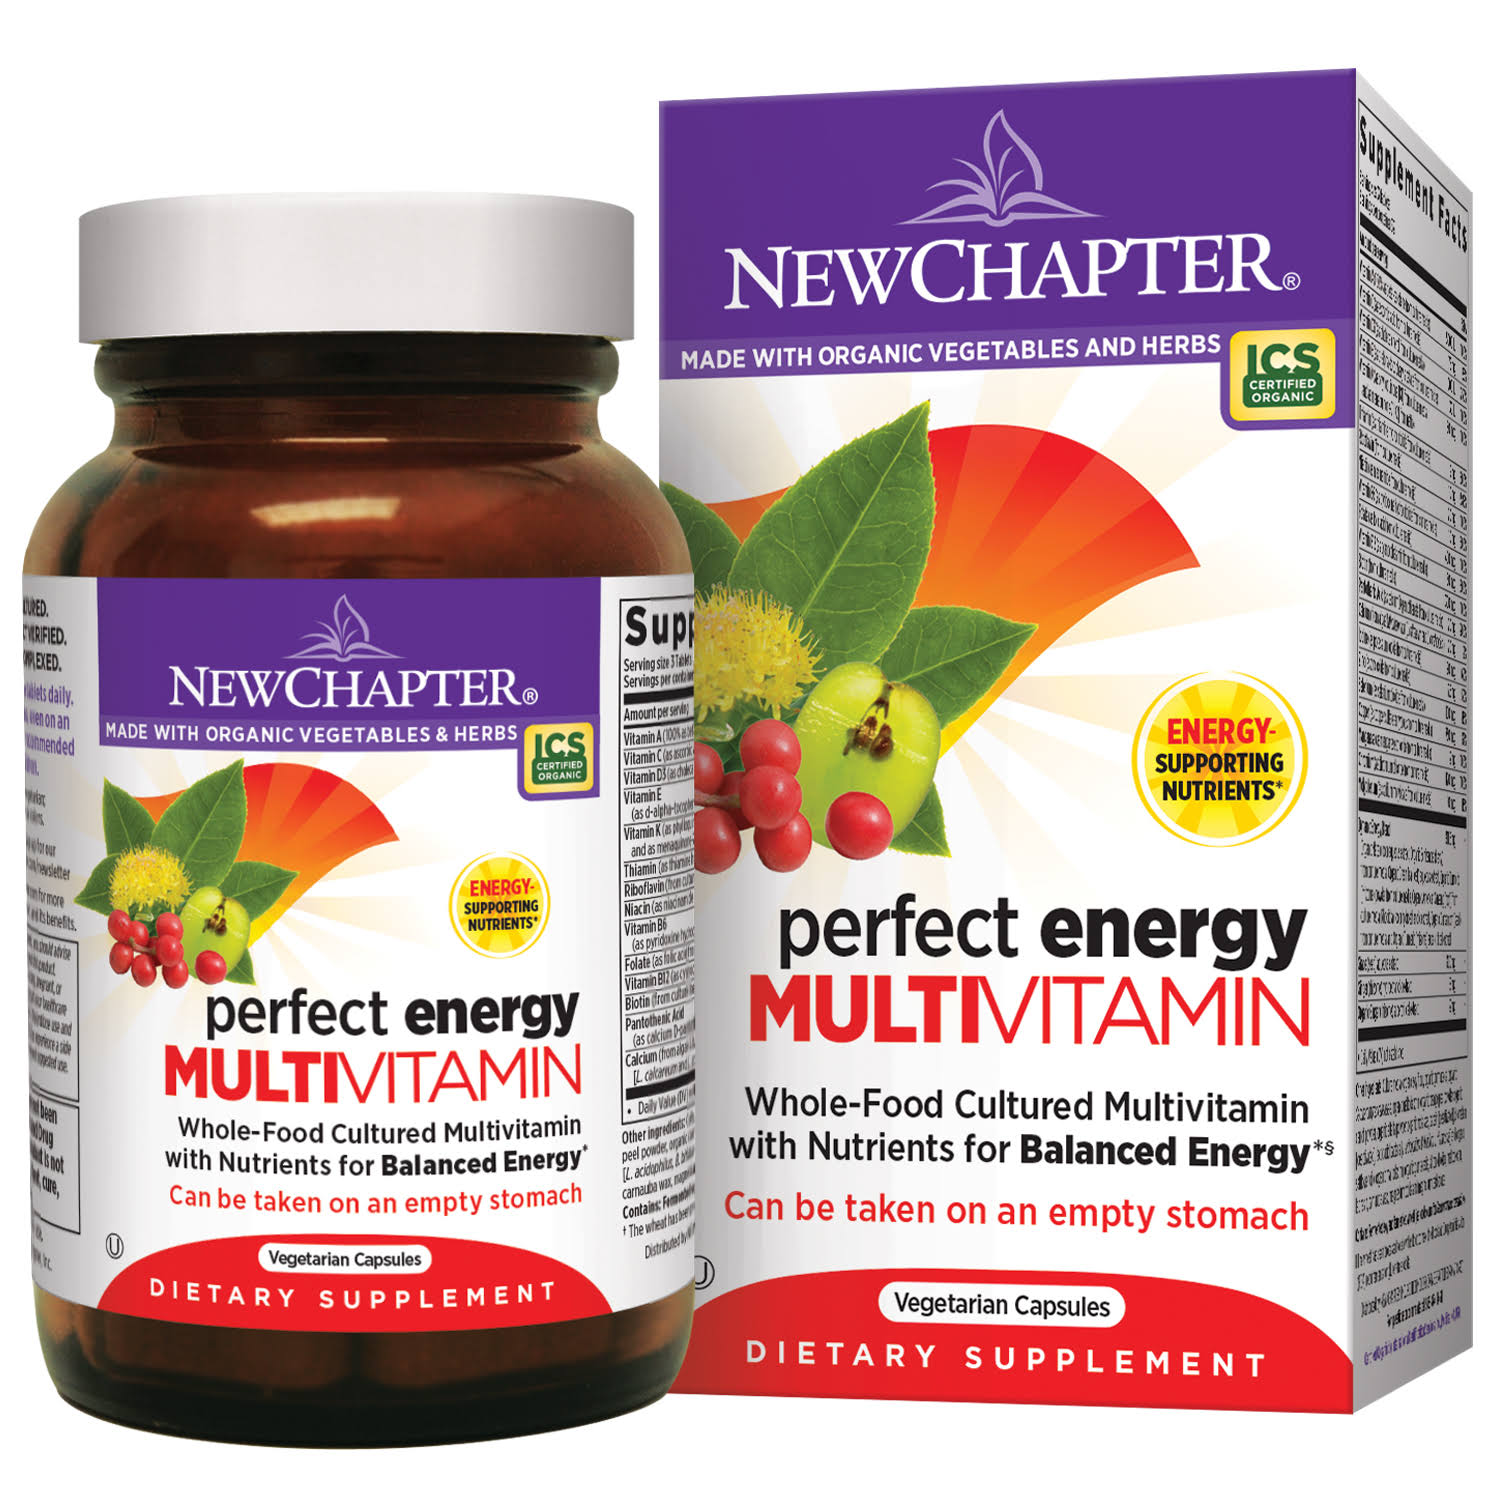 New Chapter Perfect Energy Multivitamin Supplement - 96 Tablets